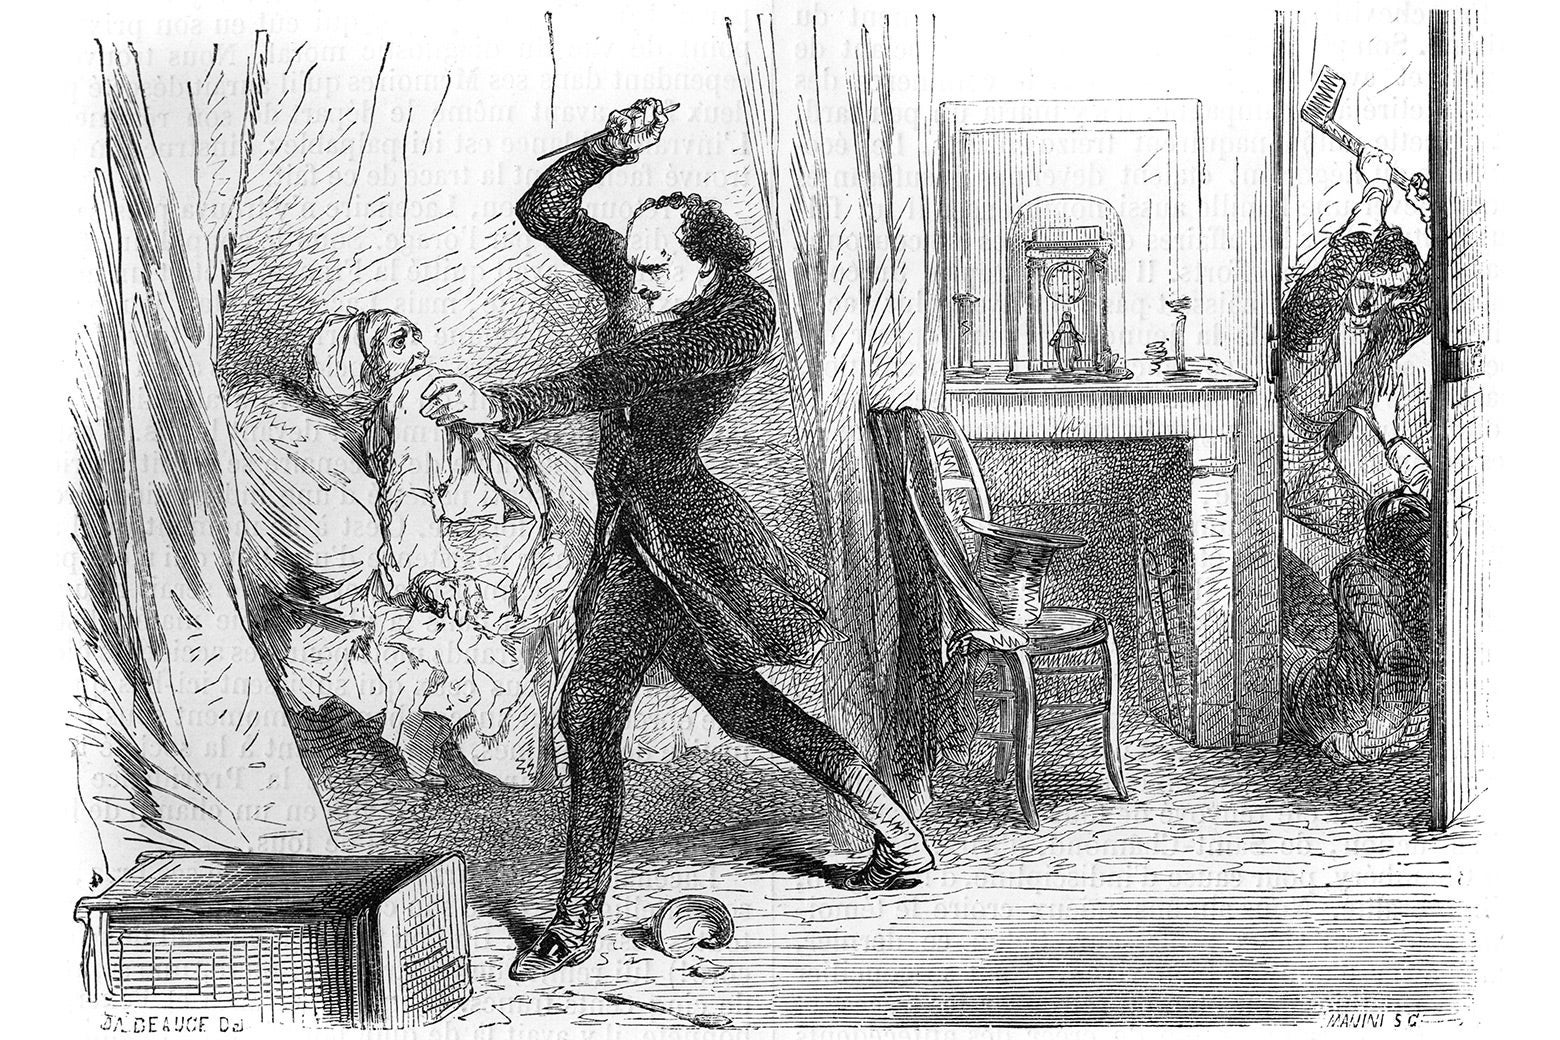 19th century drawing of a gentleman stabbing an old woman in bed as another man brings an ax down on a victim in the doorway